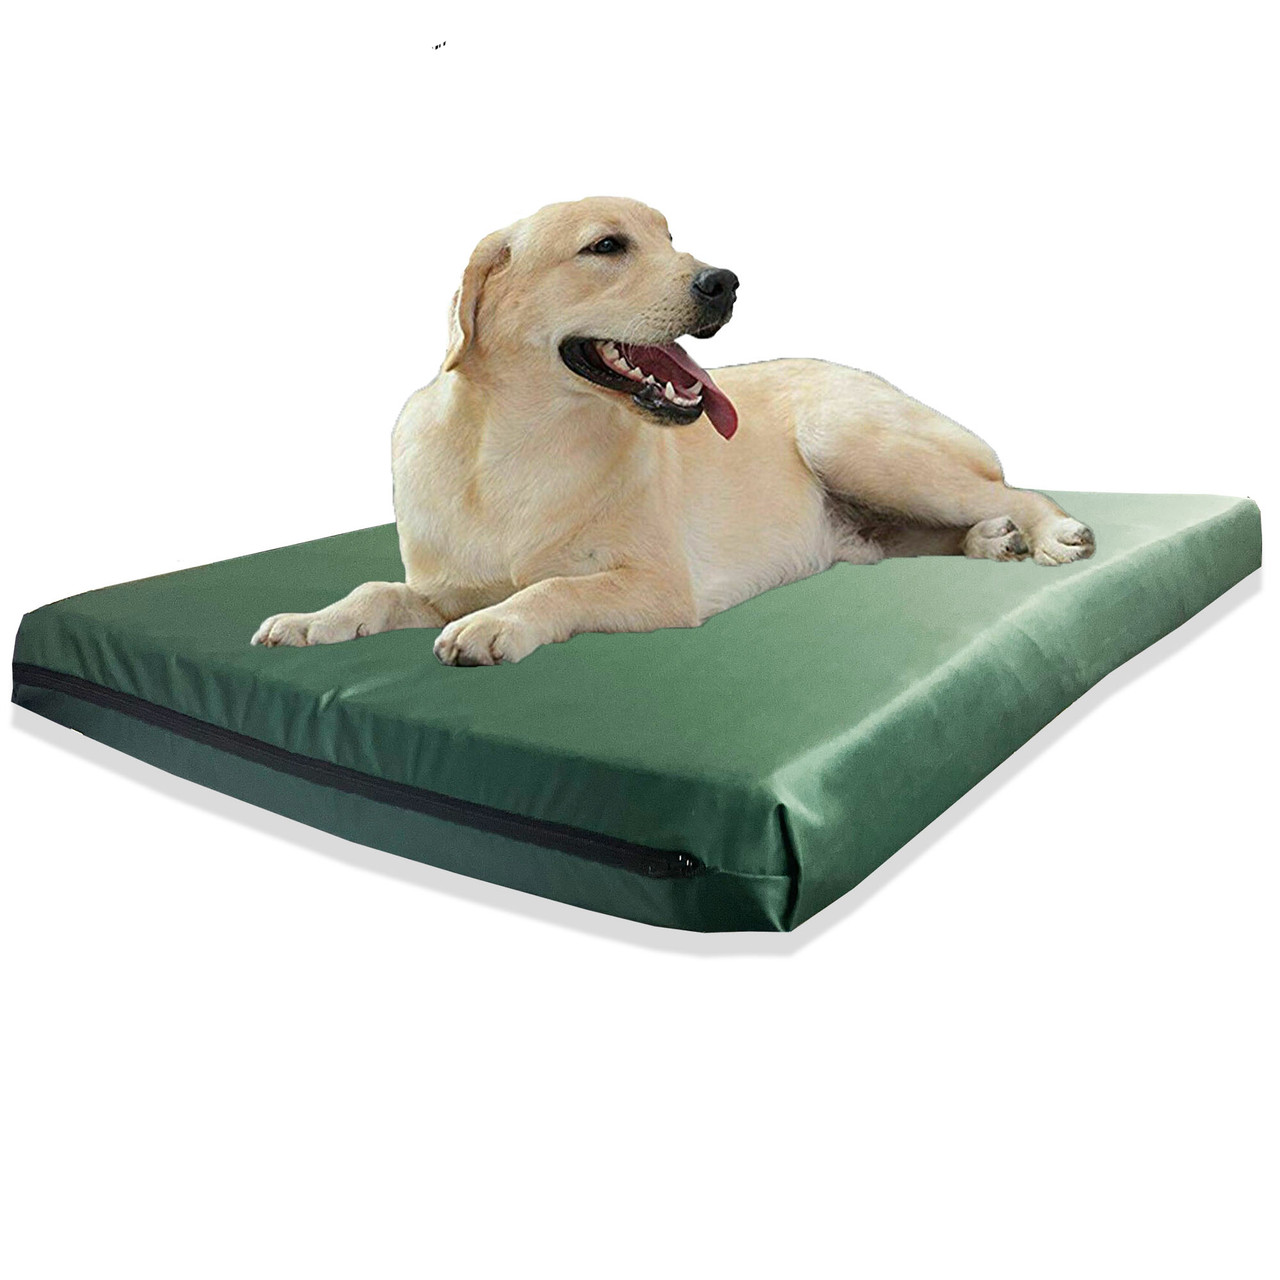 Waterproof Dog Bed Mattress, Green Water Resistant Polyester Cover